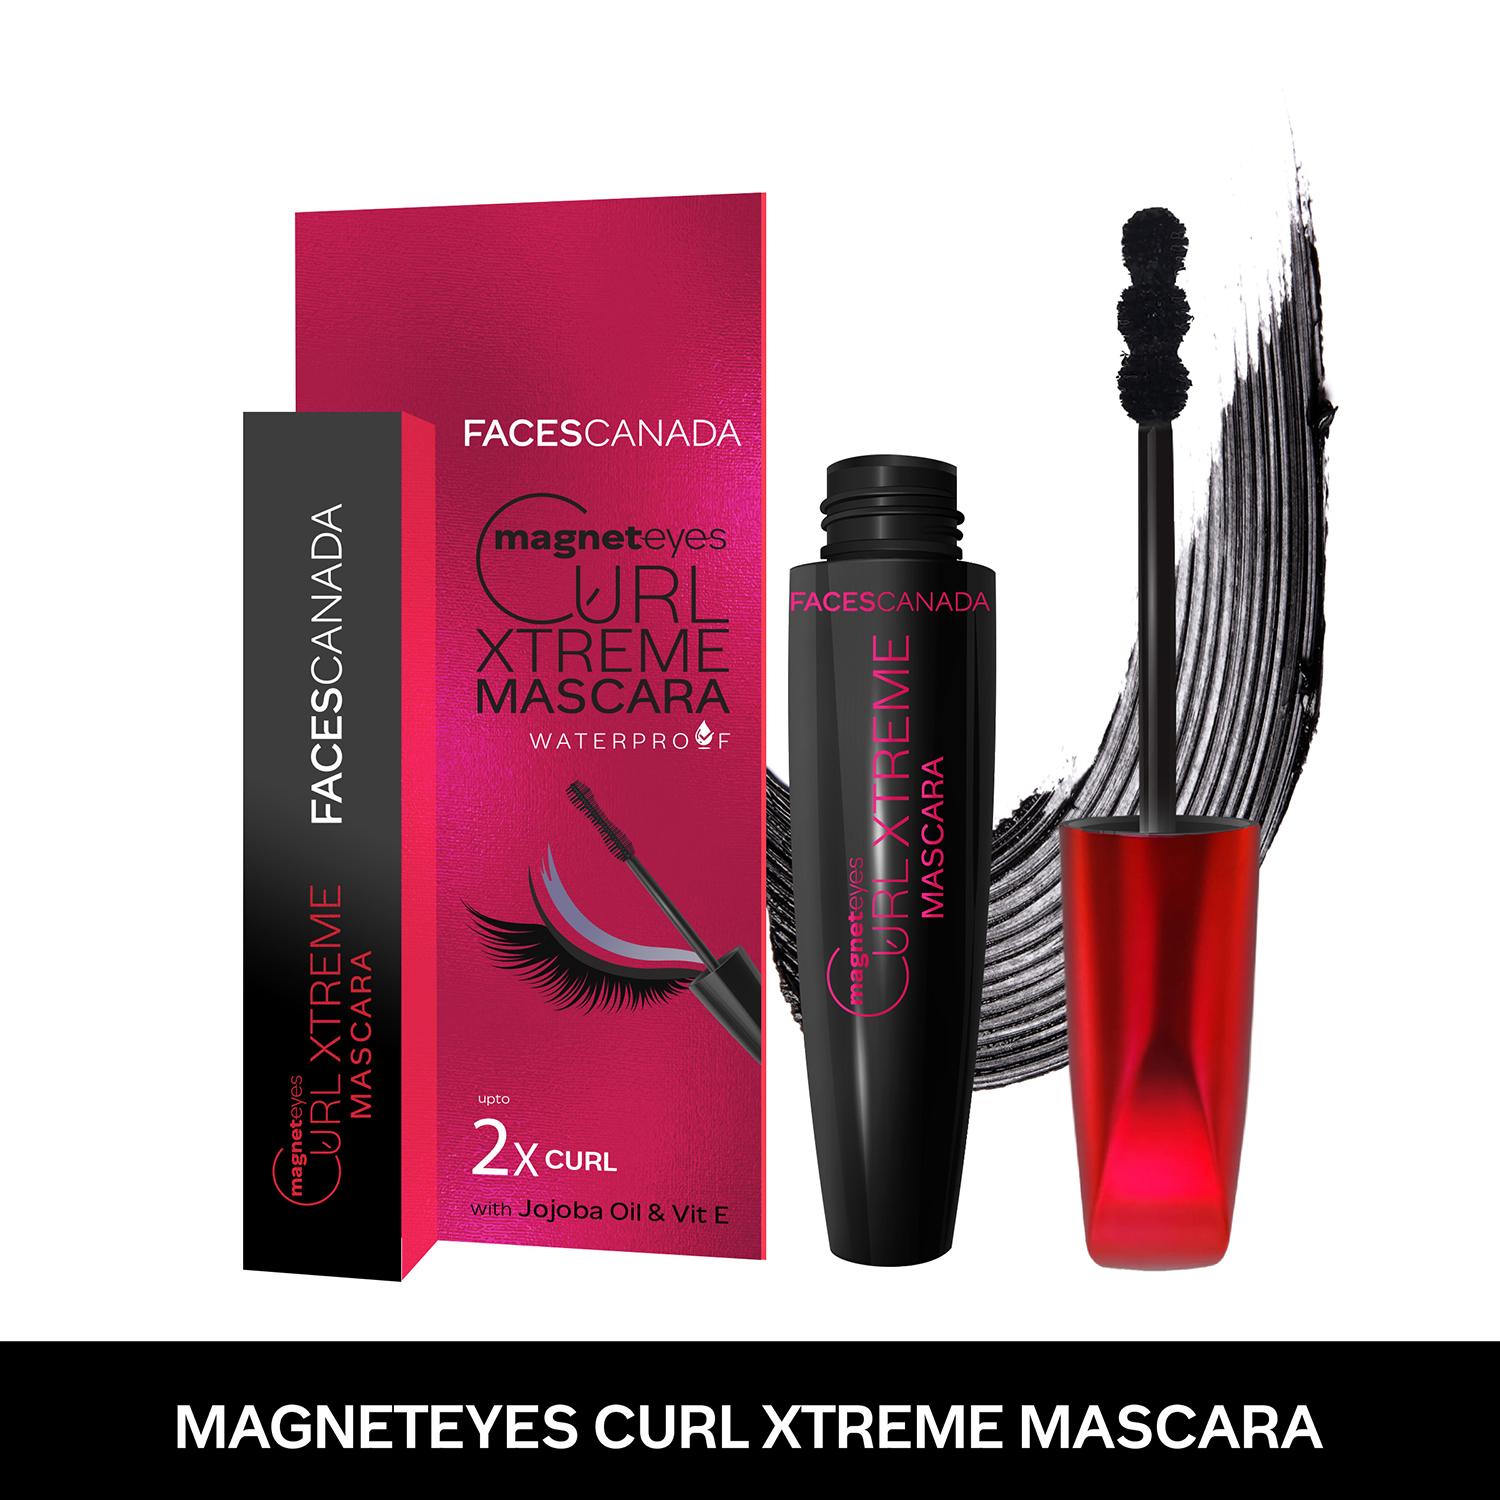 Faces Canada | Faces Canada Magneteyes Curl Xtreme Mascara, Curls Lashes, Waterproof, Long Wear - Black (8 g)